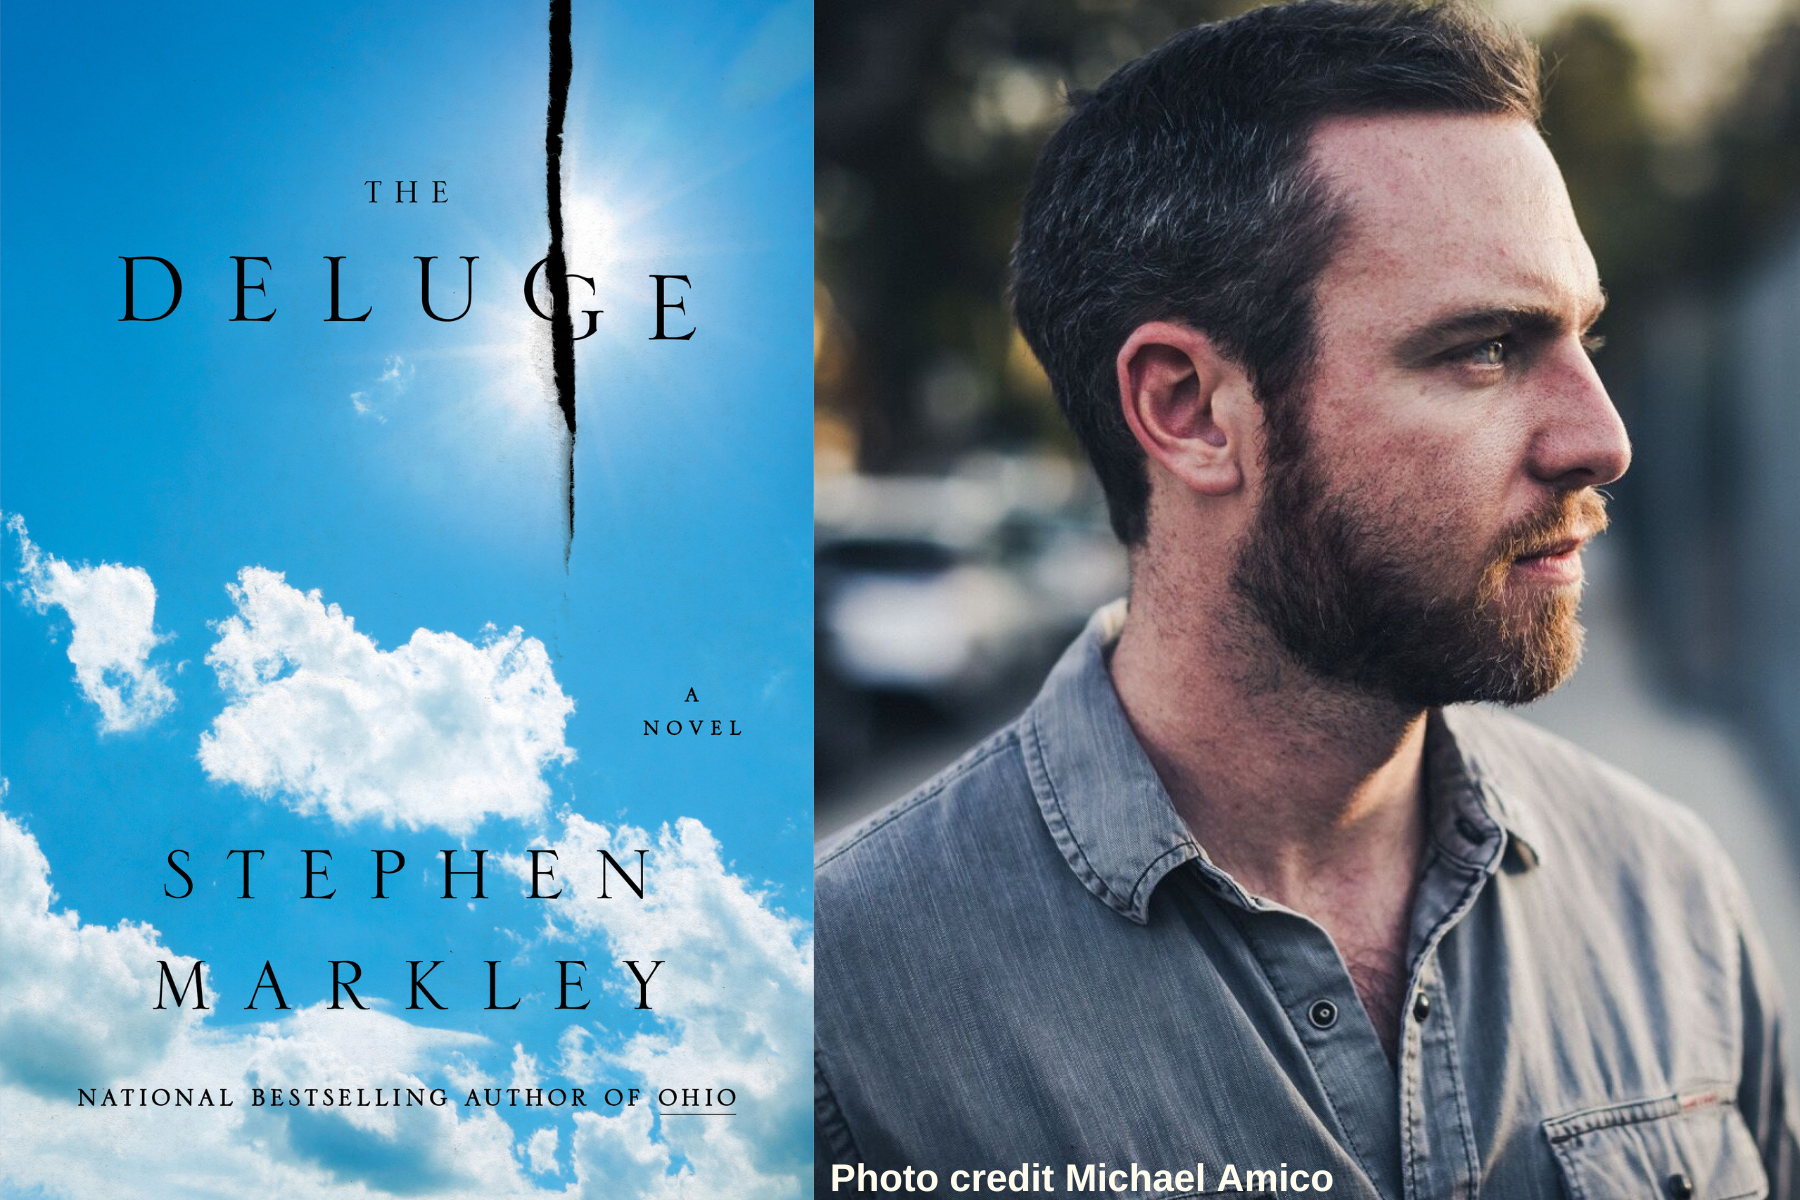 Deluge Book cover next to portrait of Stephen Markley by Michael Amico